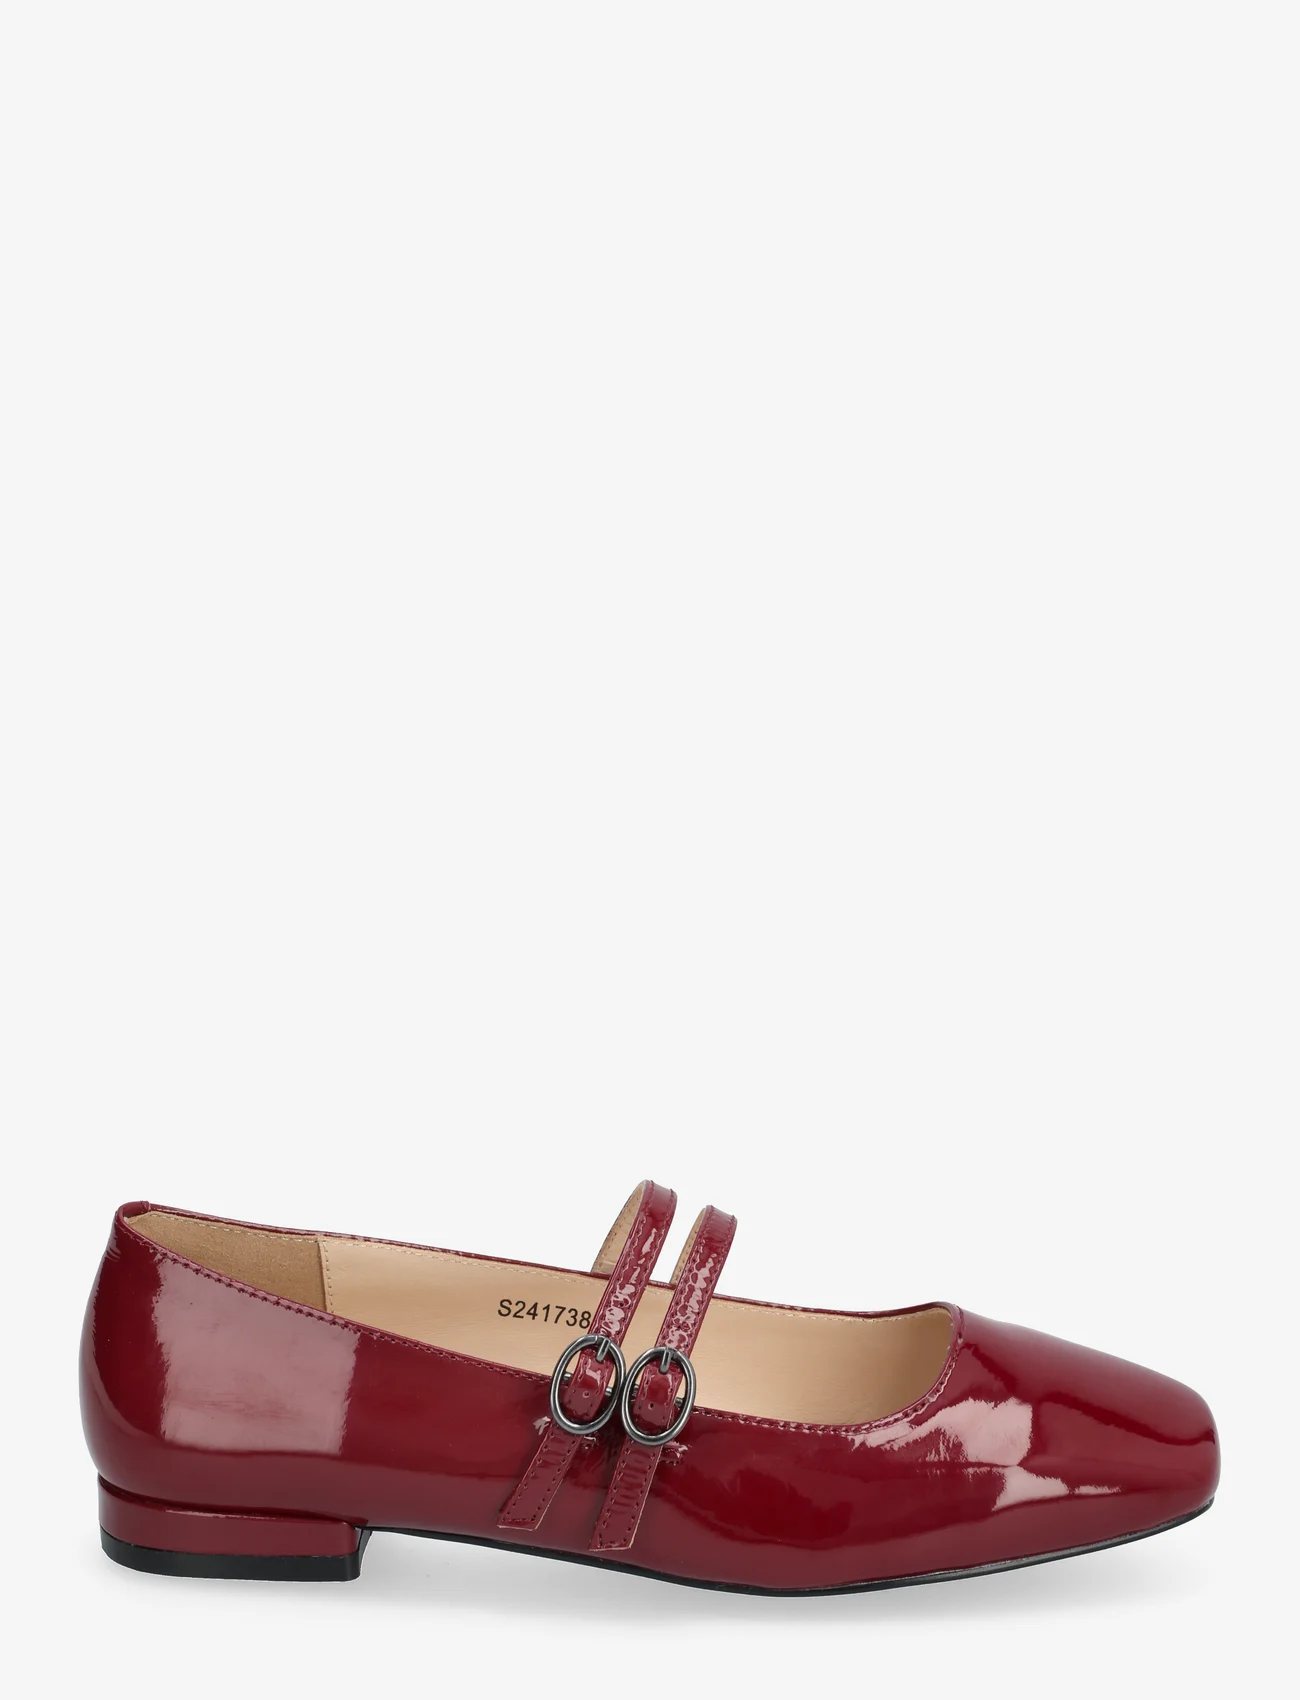 Sofie Schnoor - Shoe - party wear at outlet prices - red - 1